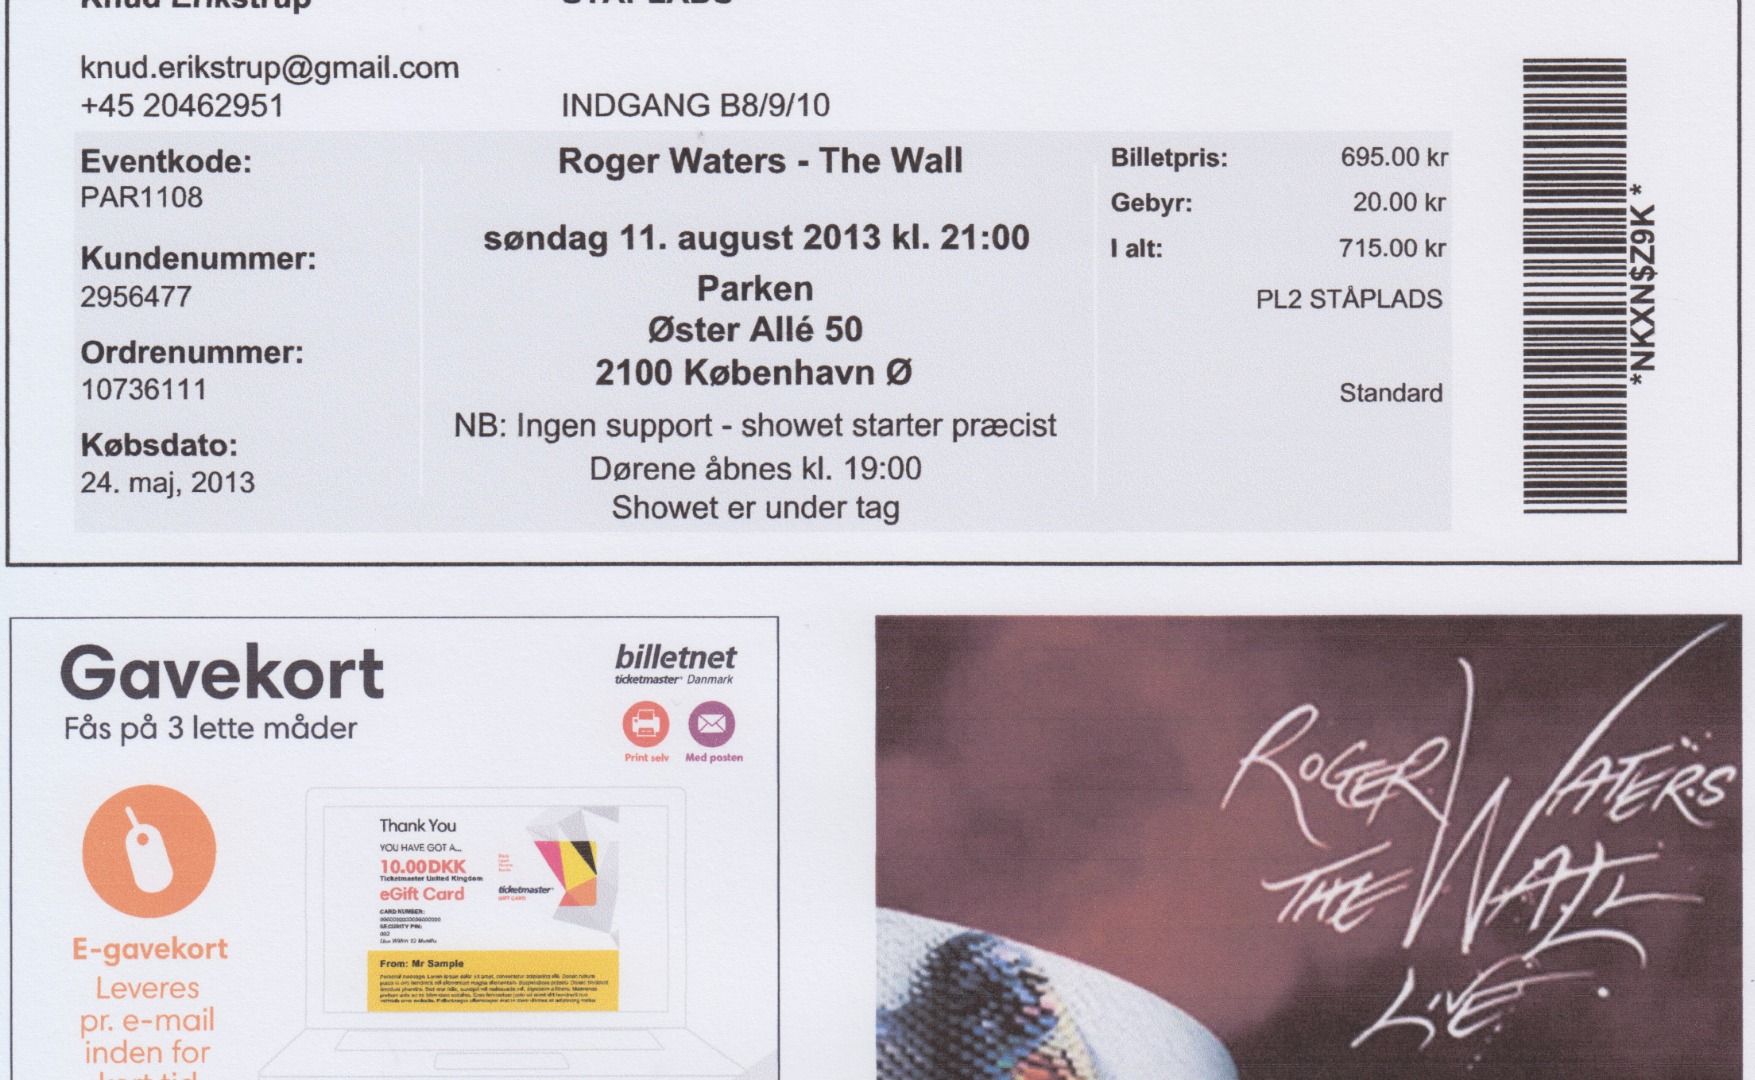 *11. august 2013 Koncert Roger Waters - The Wall